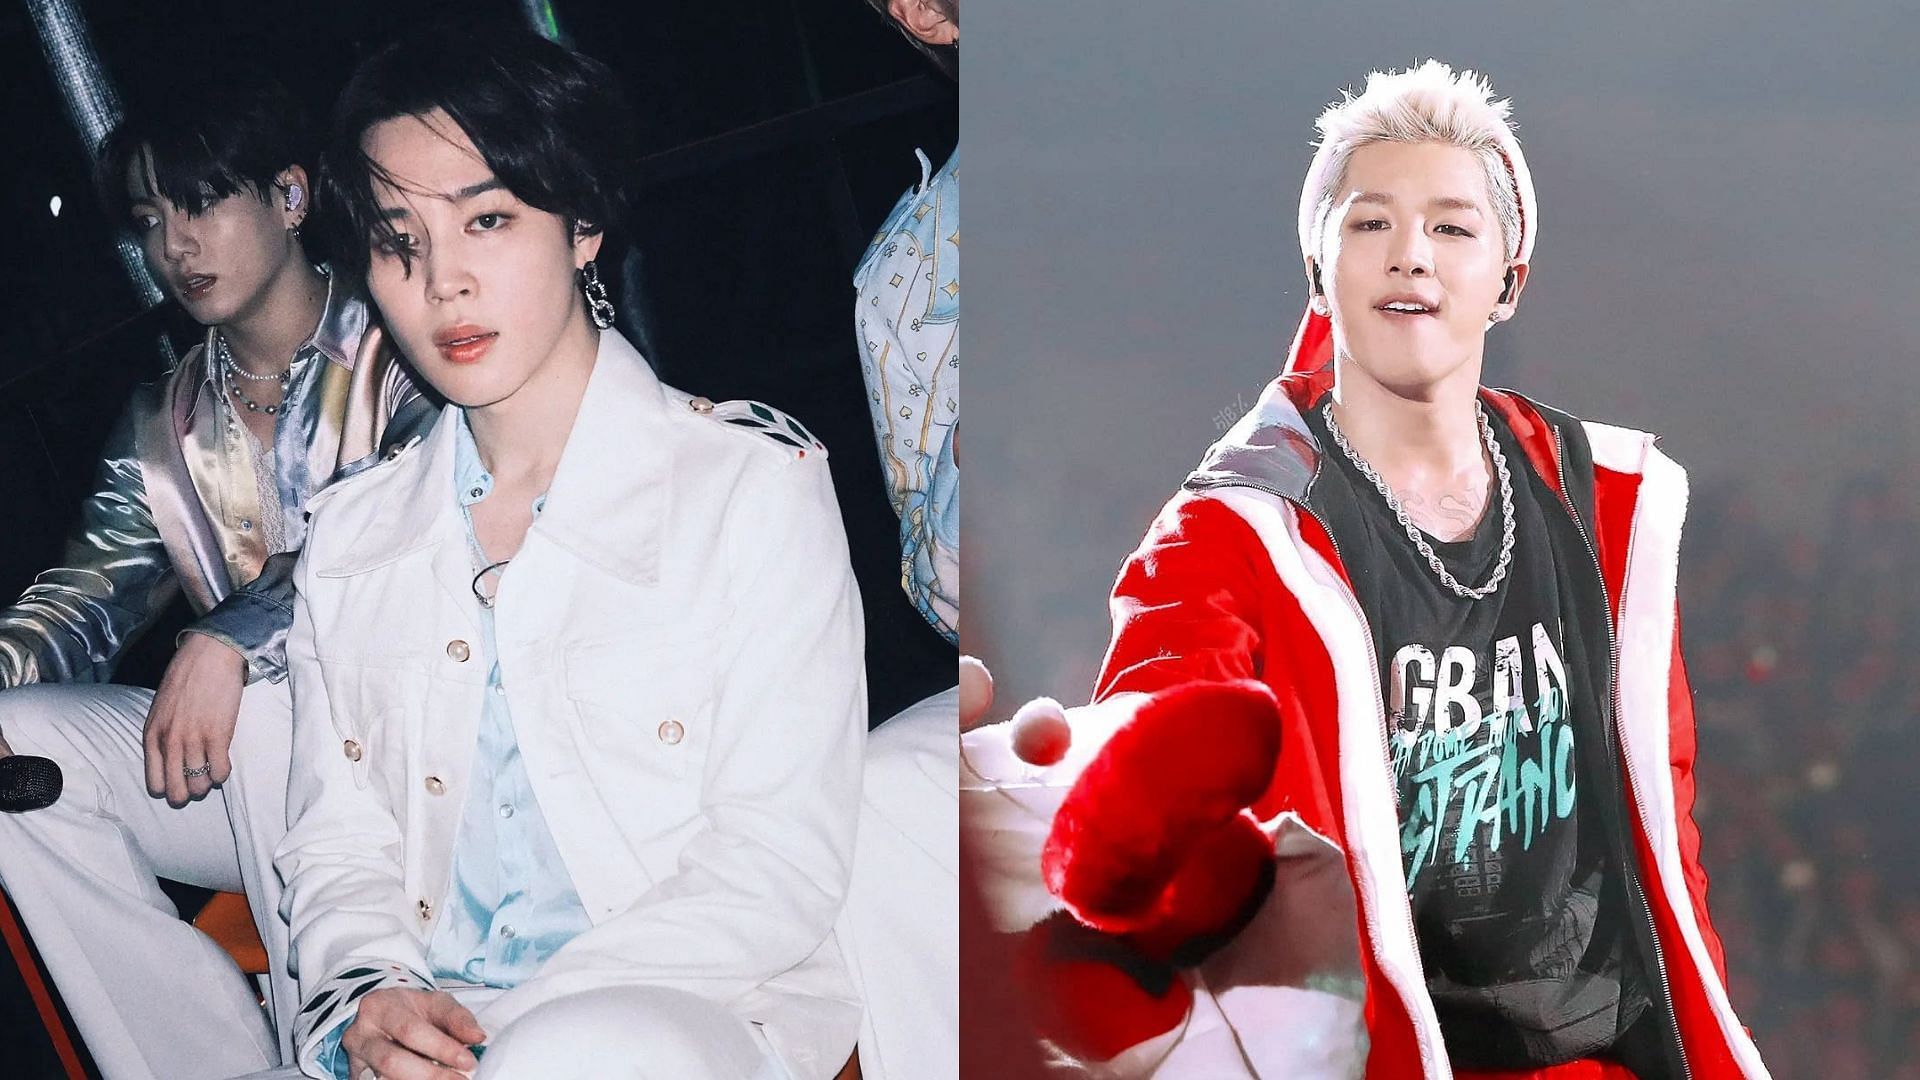 BTS X BIGBANG might come true: Jimin reportedly featuring on Taeyang